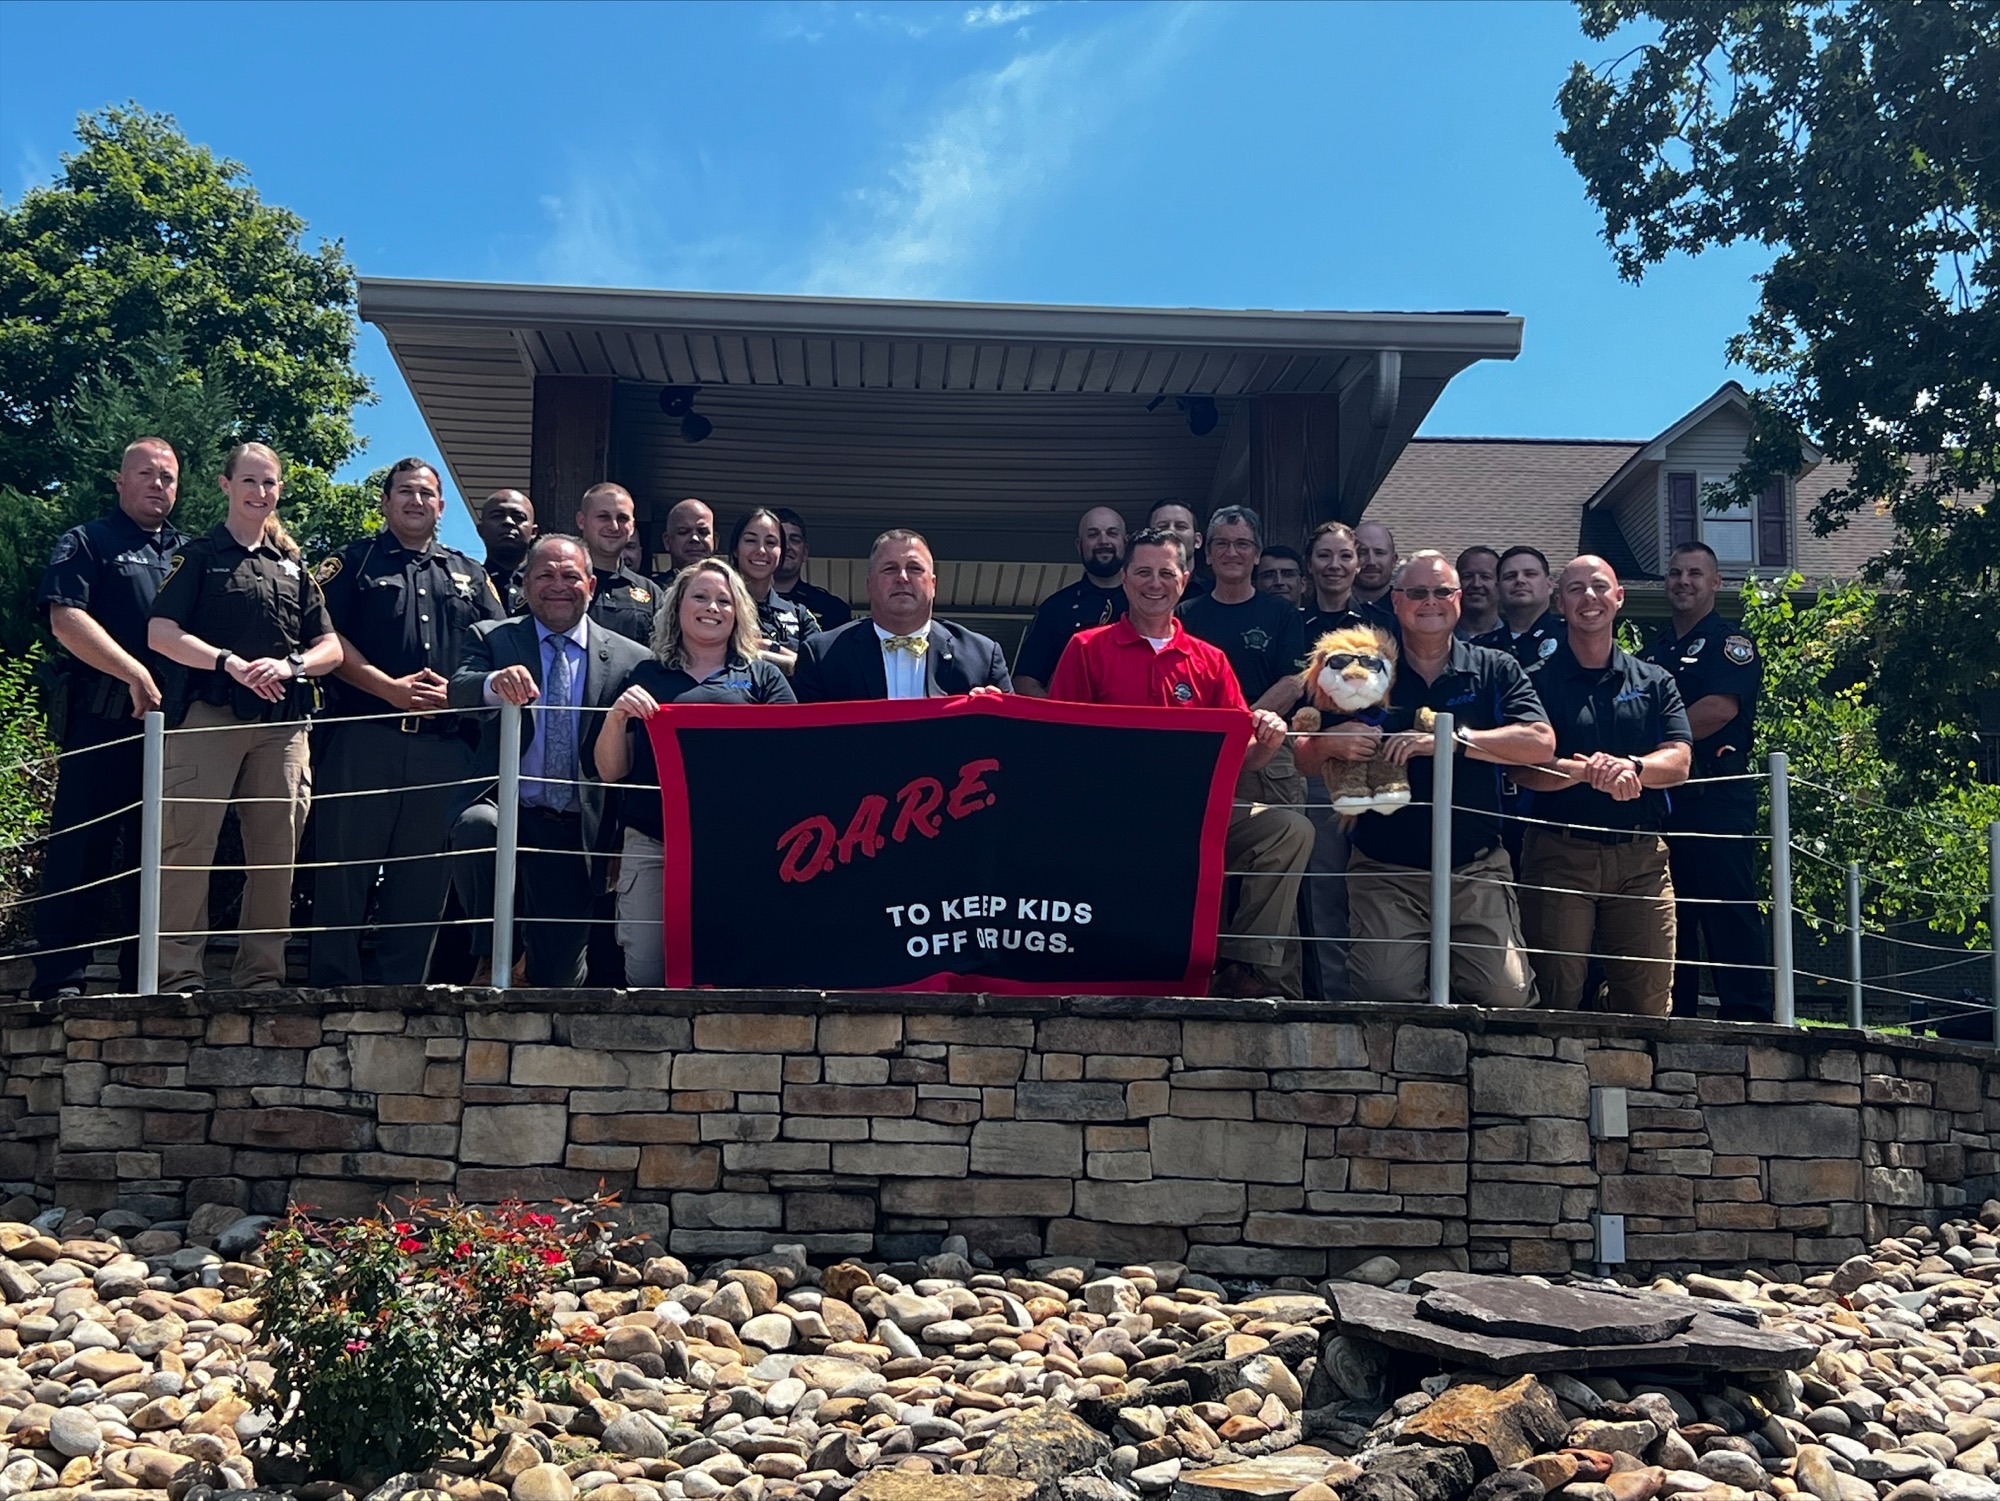 Class Photo from Kentucky's D.A.R.E. Officer Training #73 held on August 8 – 19, 2022 in Burkesville, KY